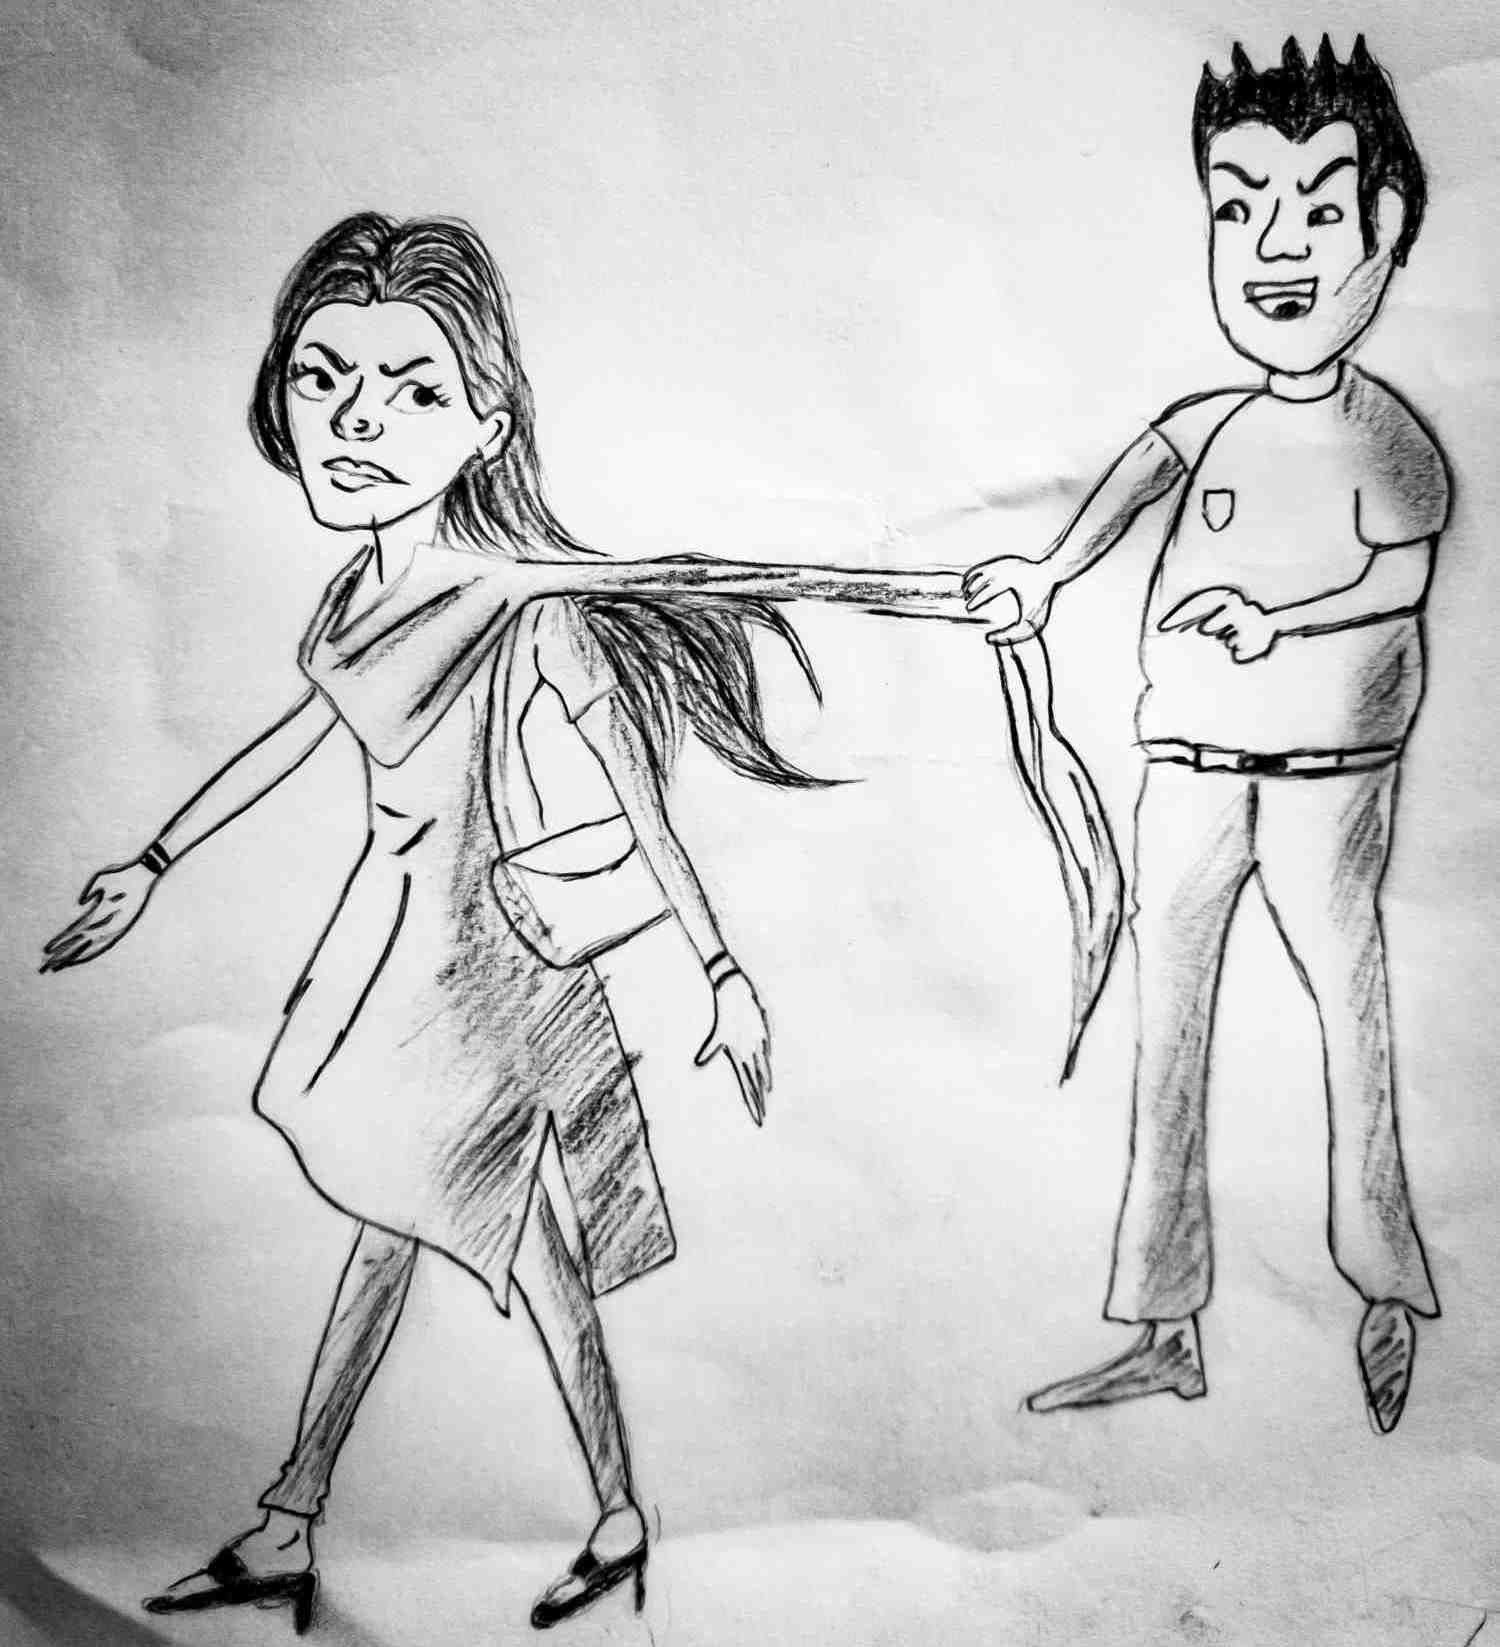 I often come home crying': Eve-teasing, the 'unexorcised demon' of ...